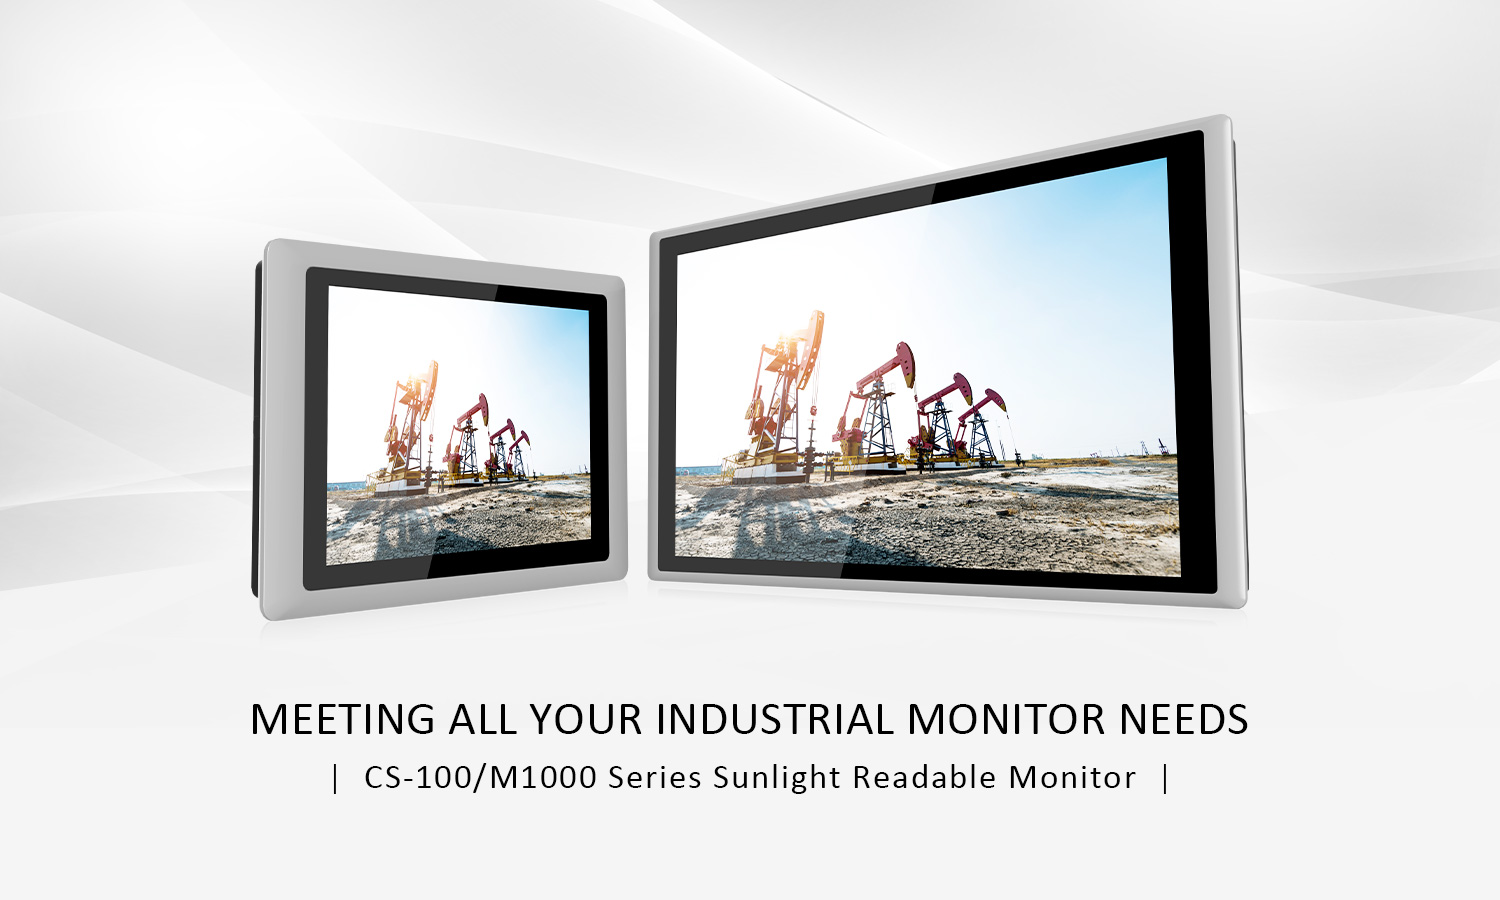 Meeting All Your Industrial Monitor Needs, CS-100 / M1000 Series Sunlight Readable Monitor